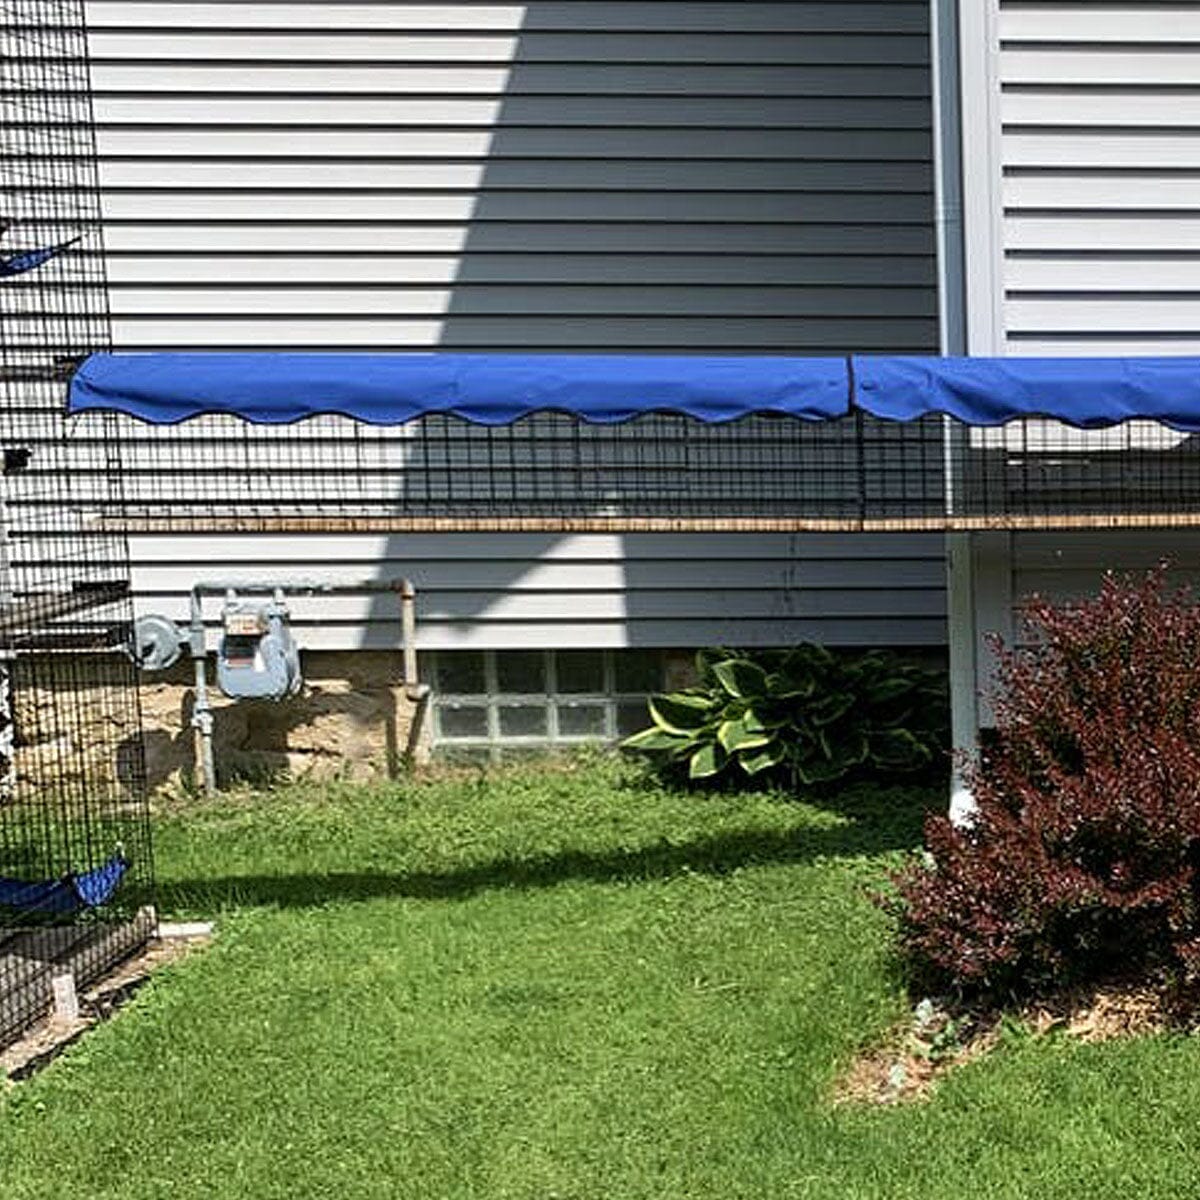 Awnings For Catio Tunnels - Habitat Haven